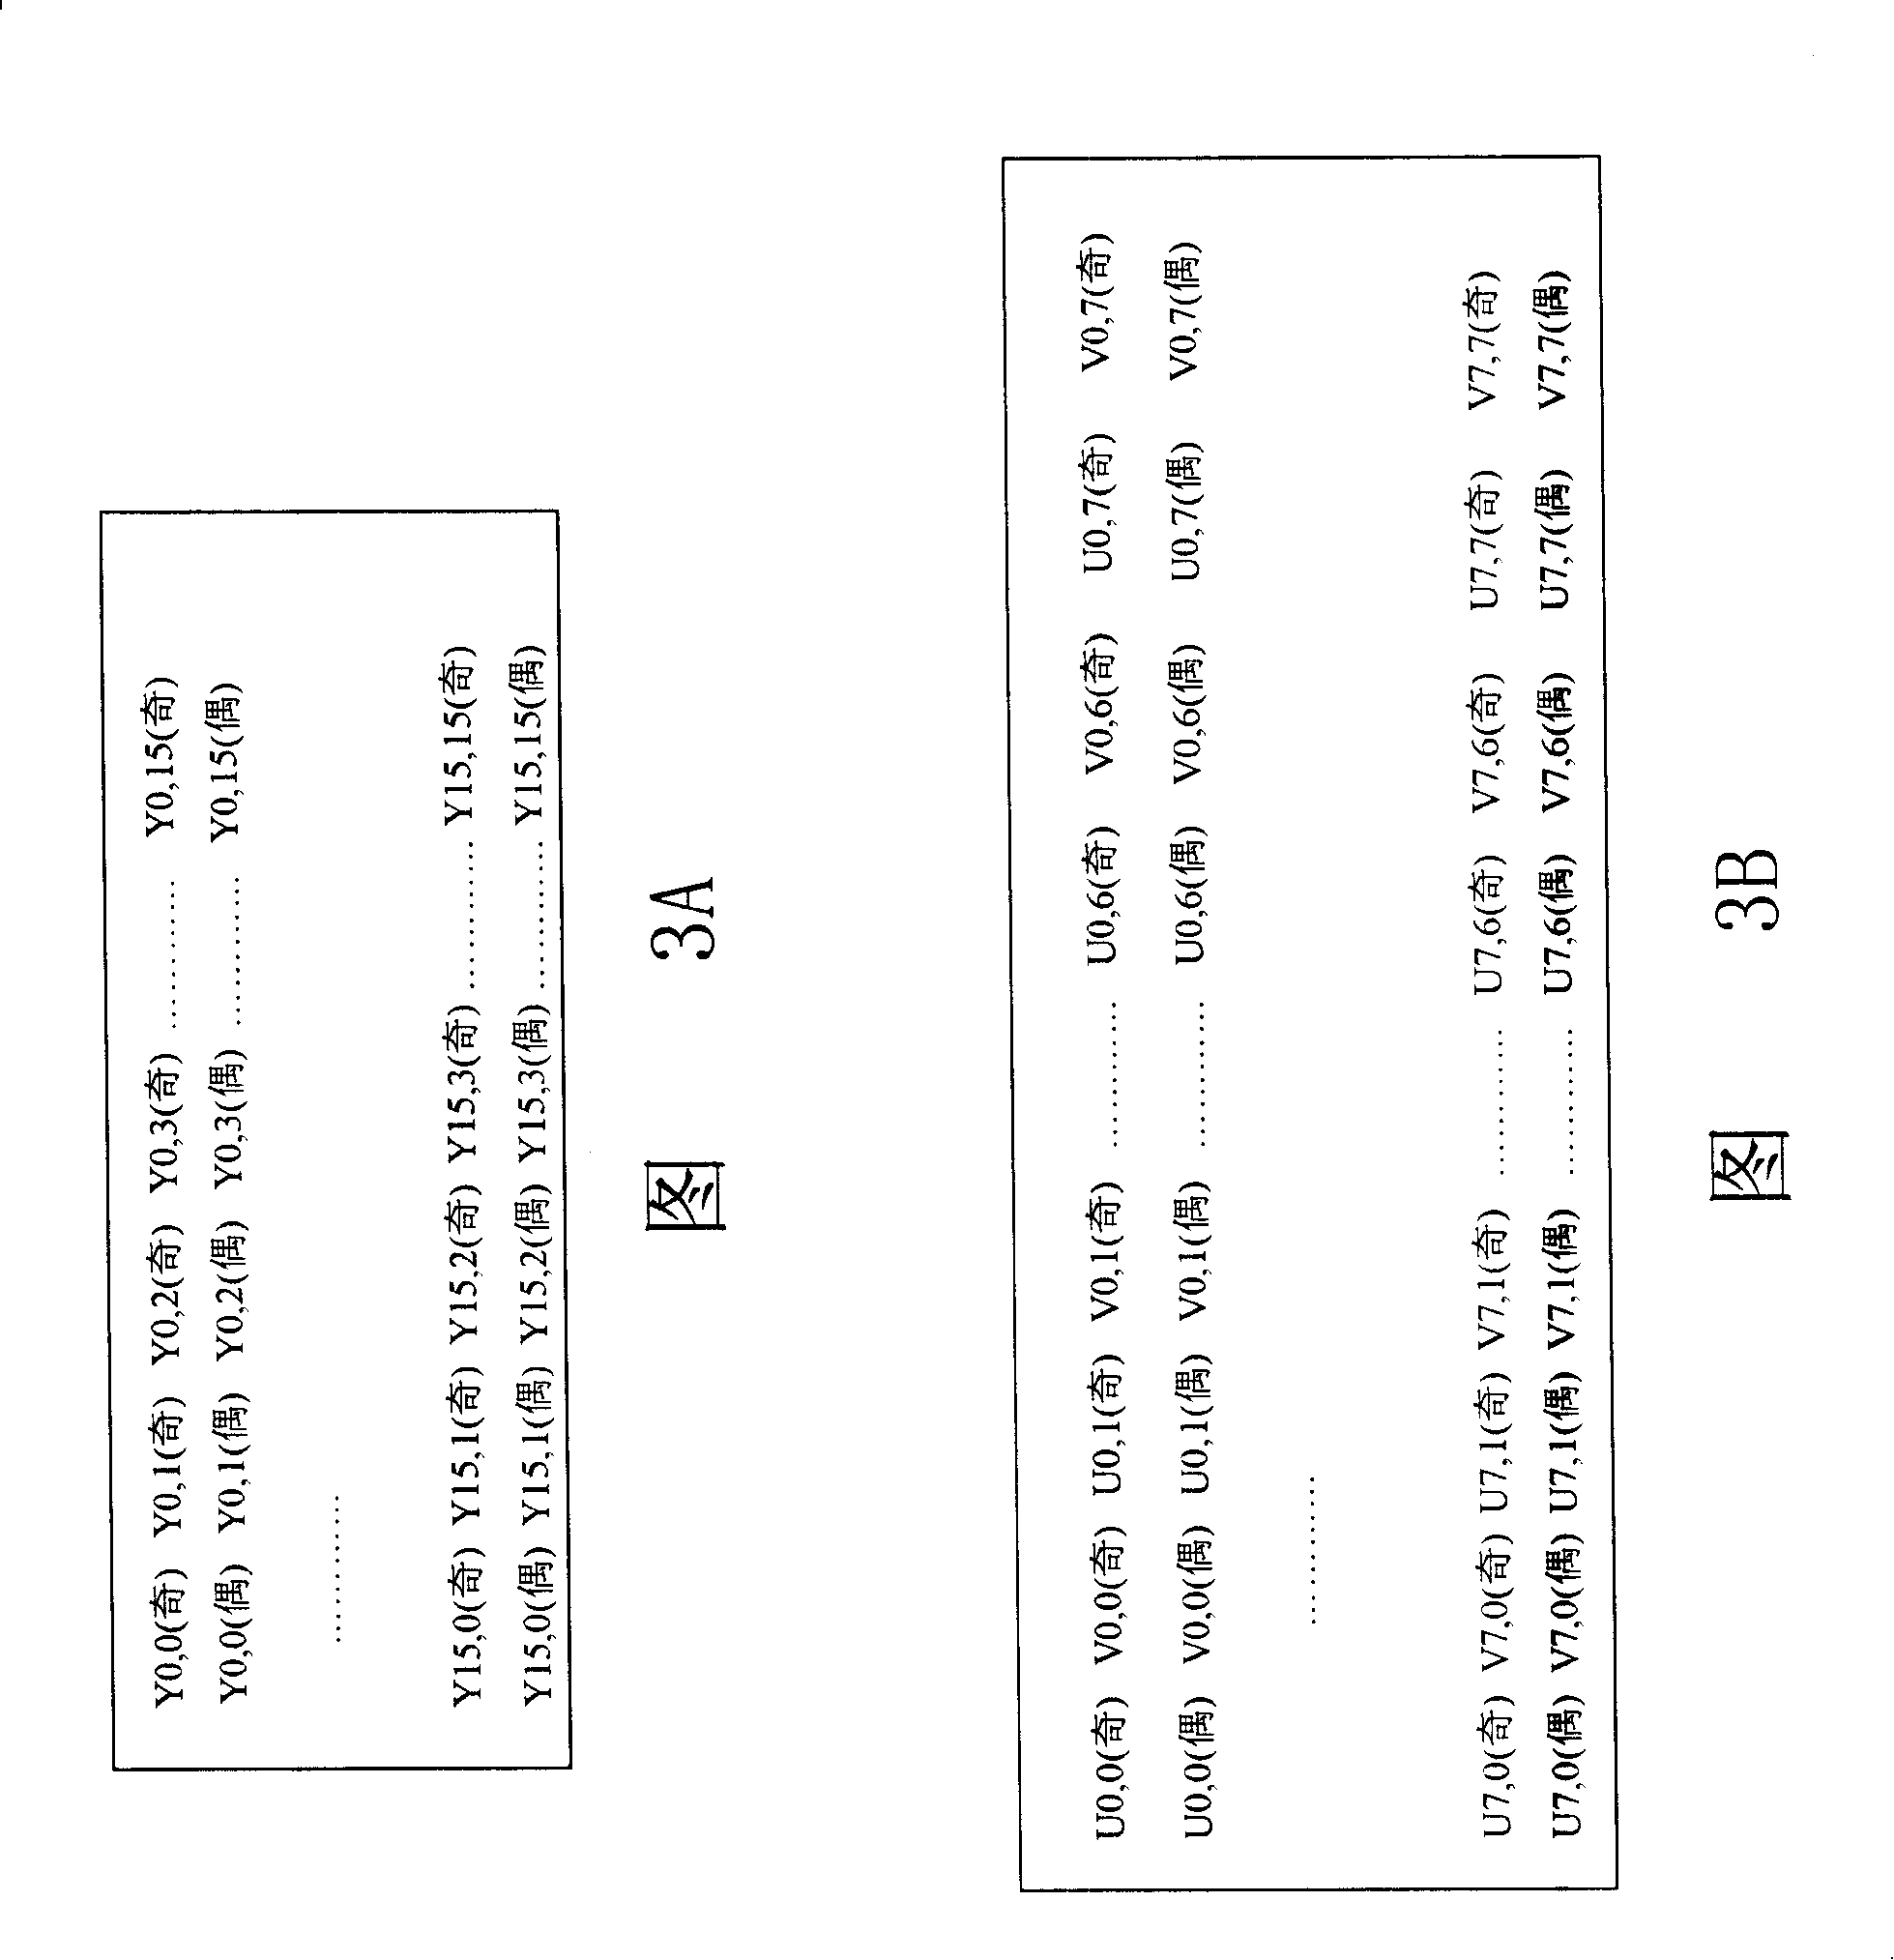 Image address mapping method in memory